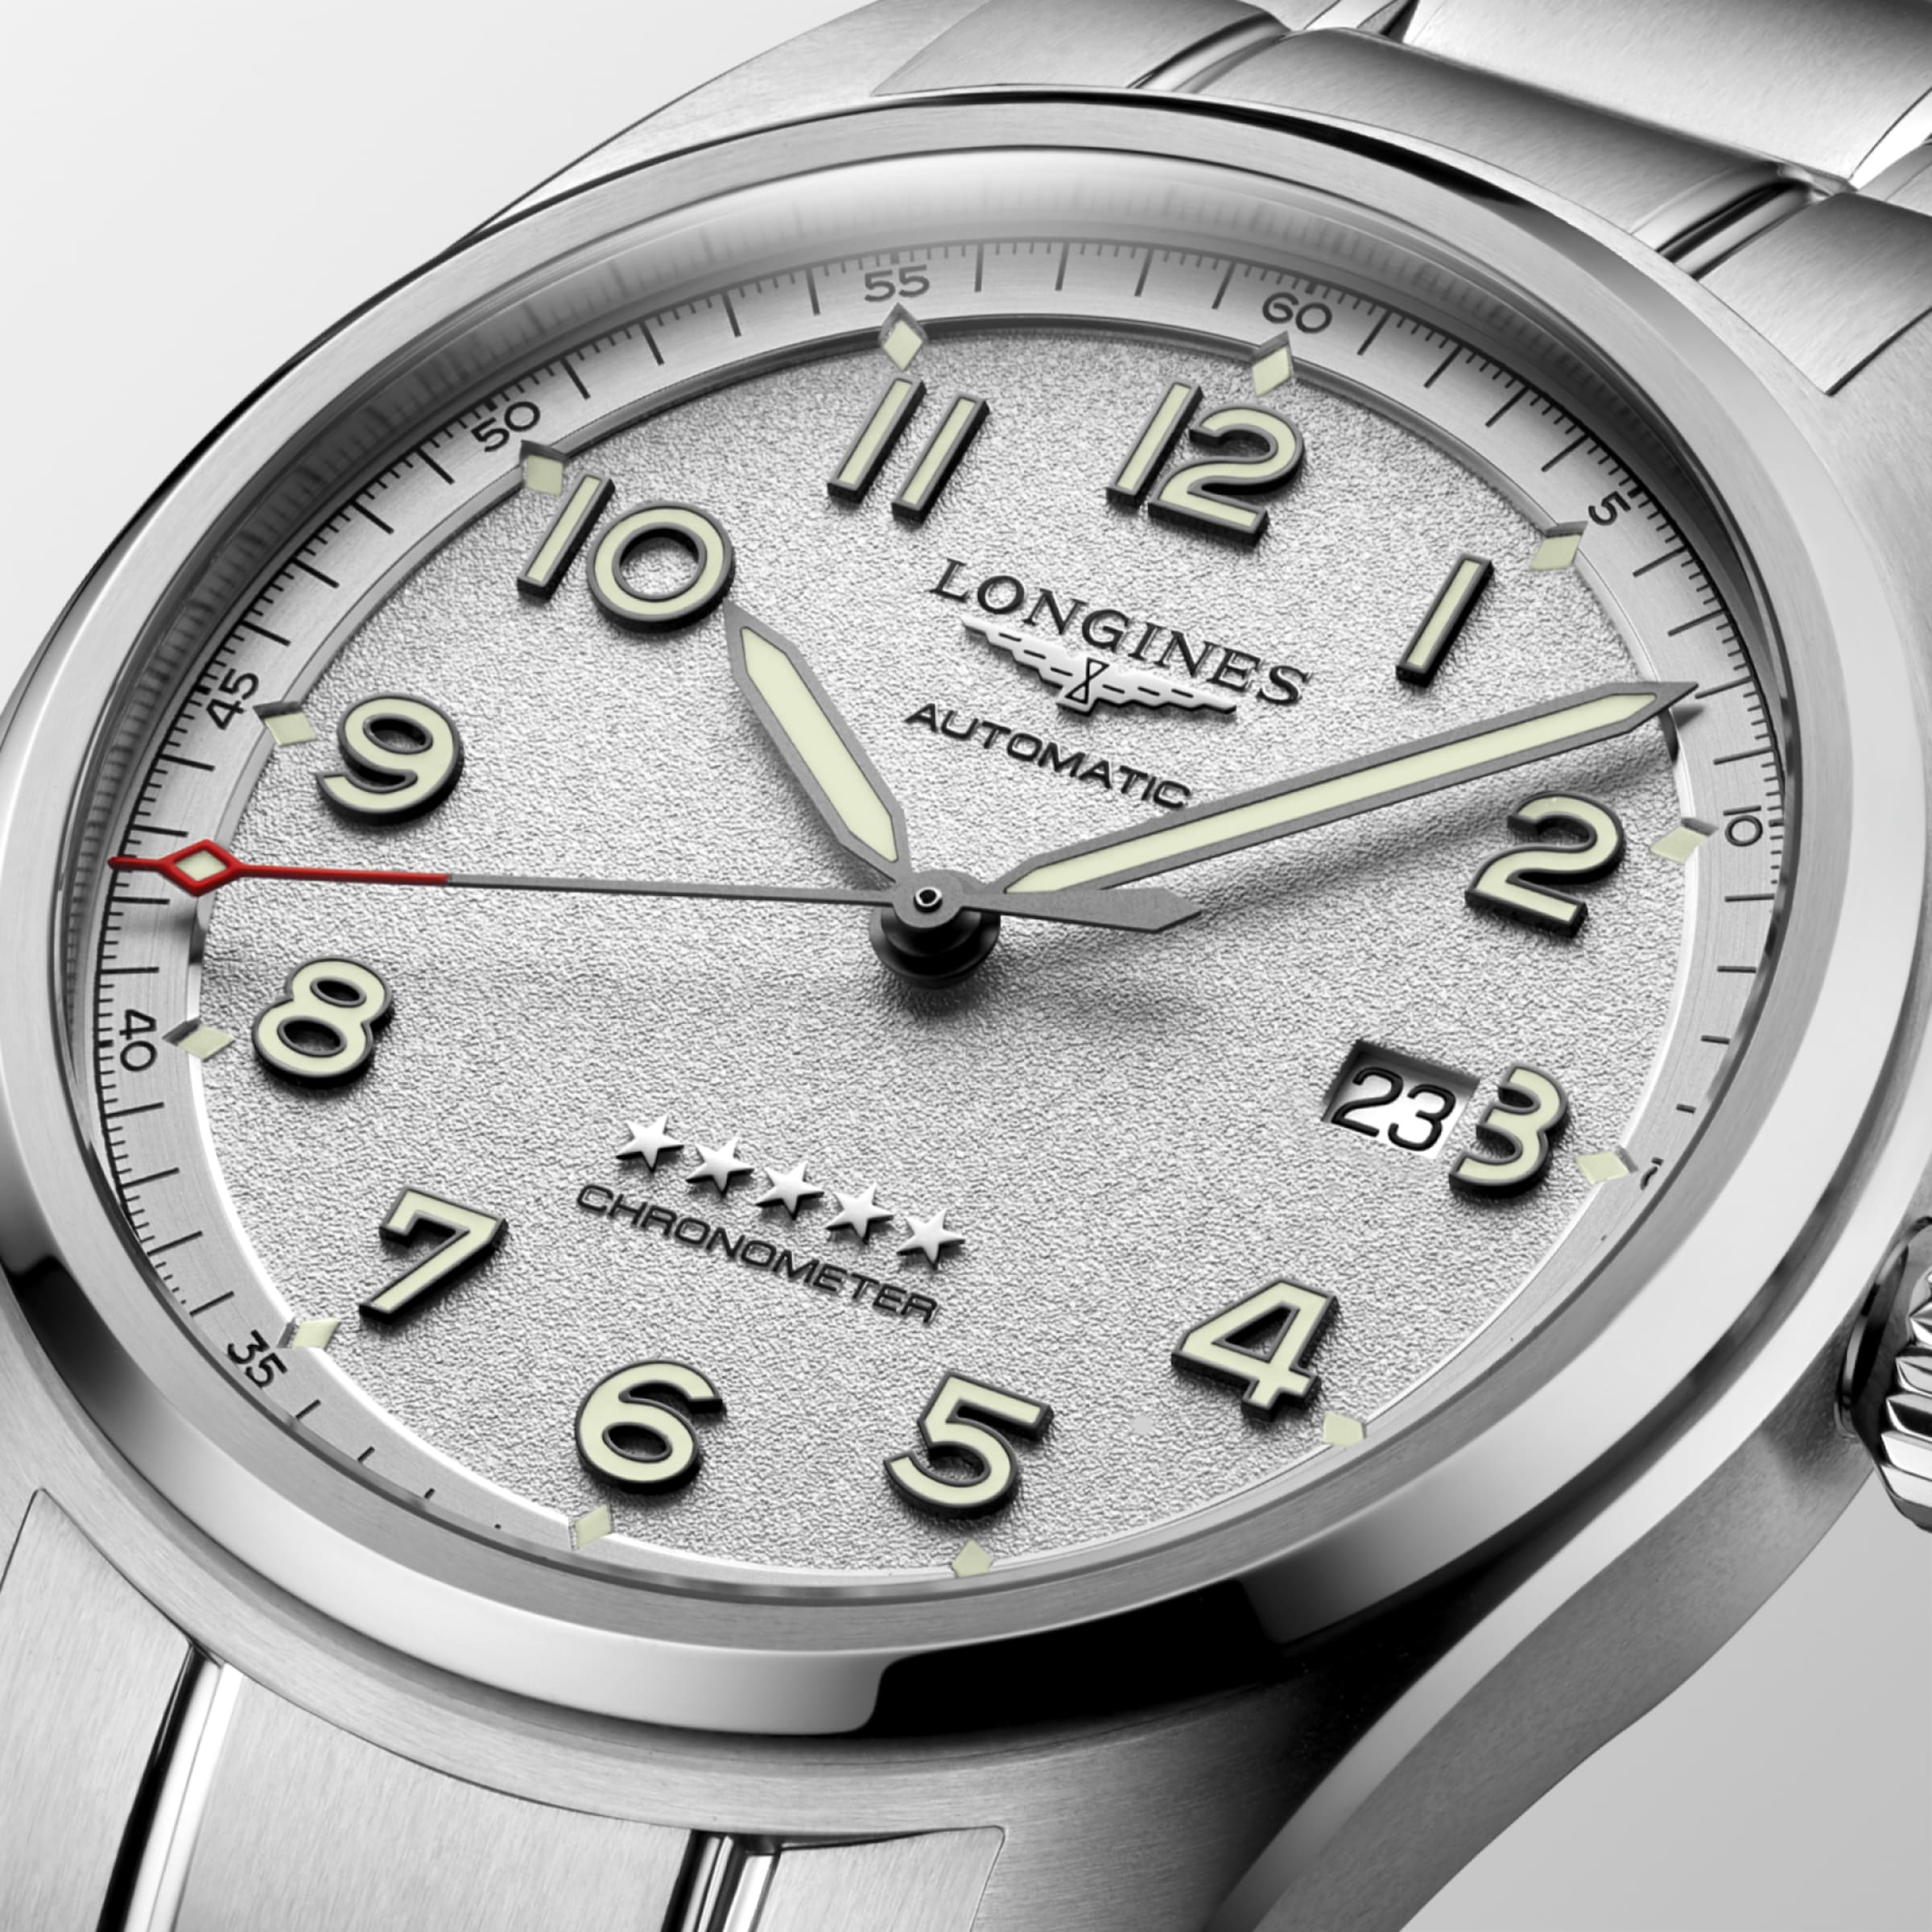 Longines SPIRIT Automatic Stainless steel Watch - L3.811.4.73.6